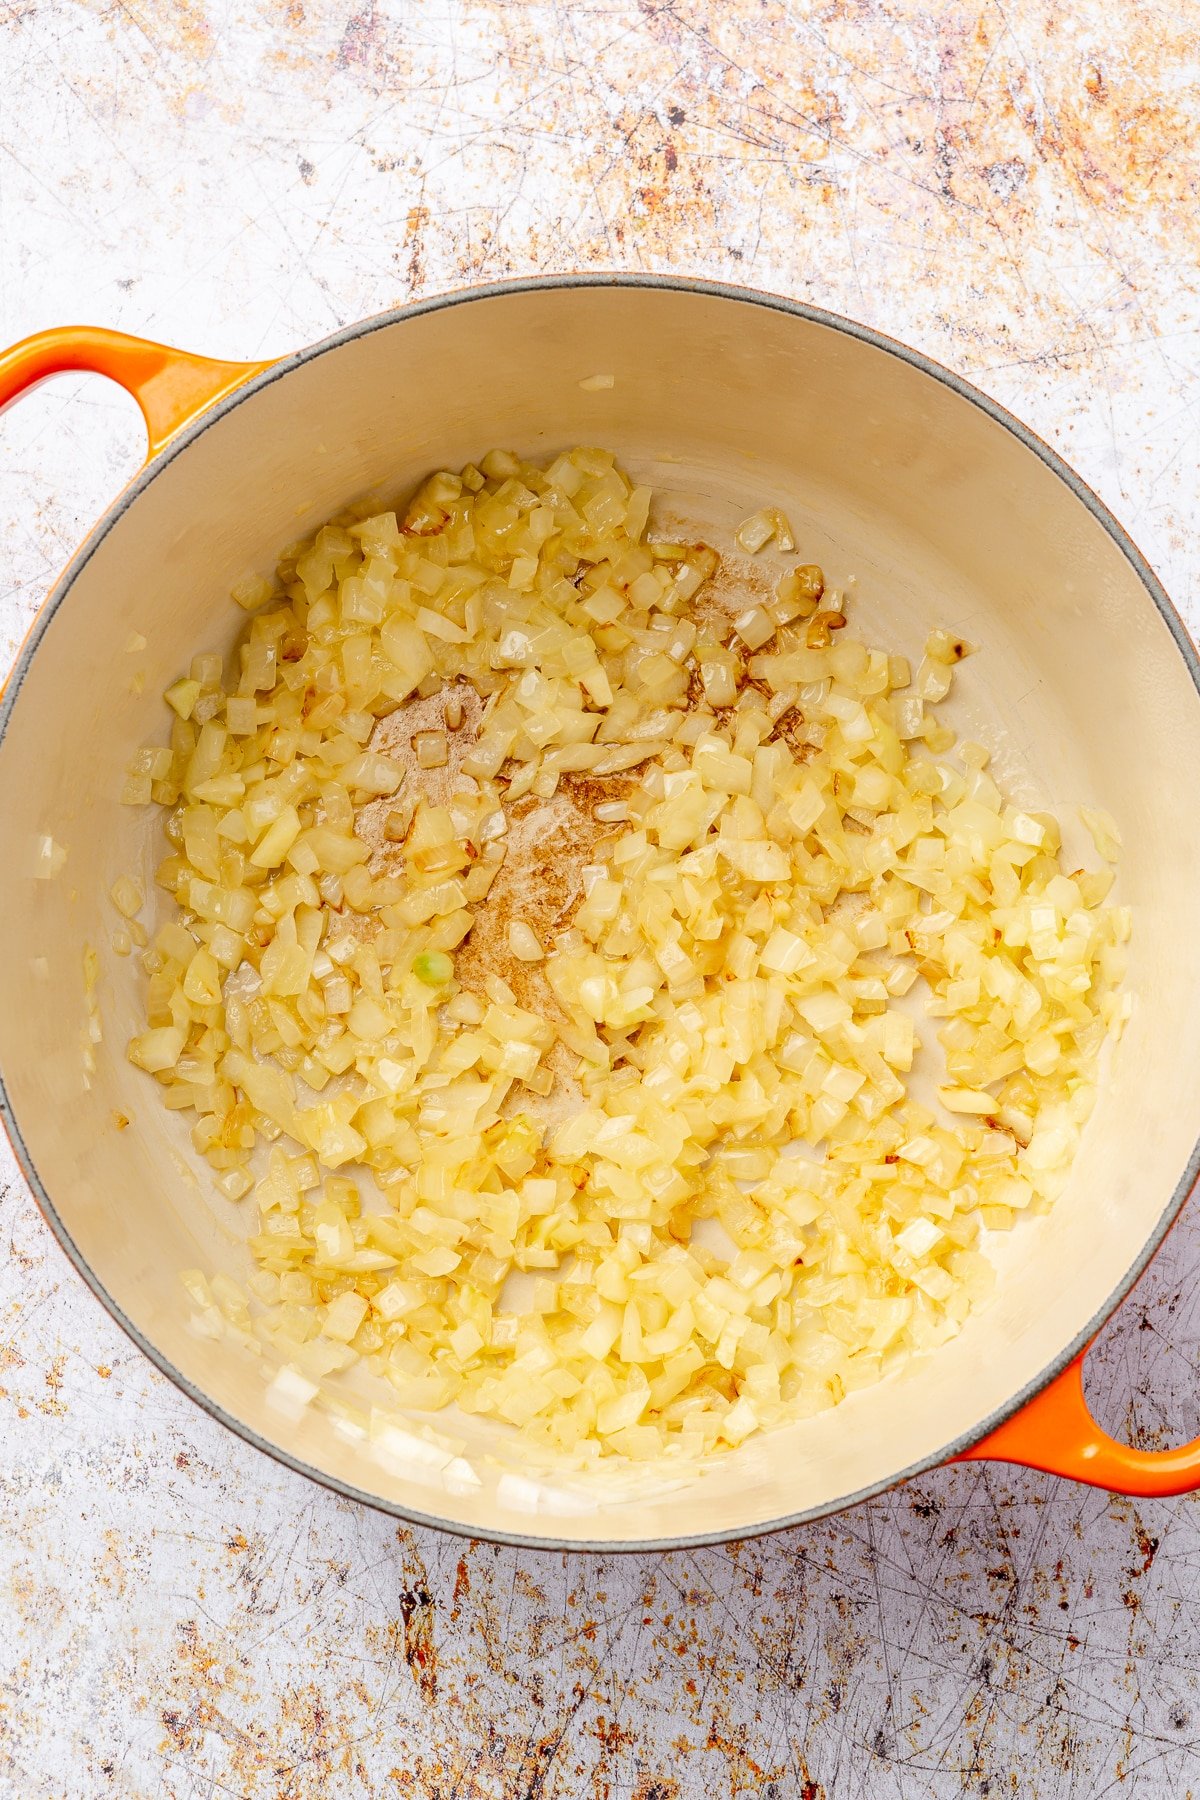 Slightly browned and translucent chopped onions sit in an enameled pot.